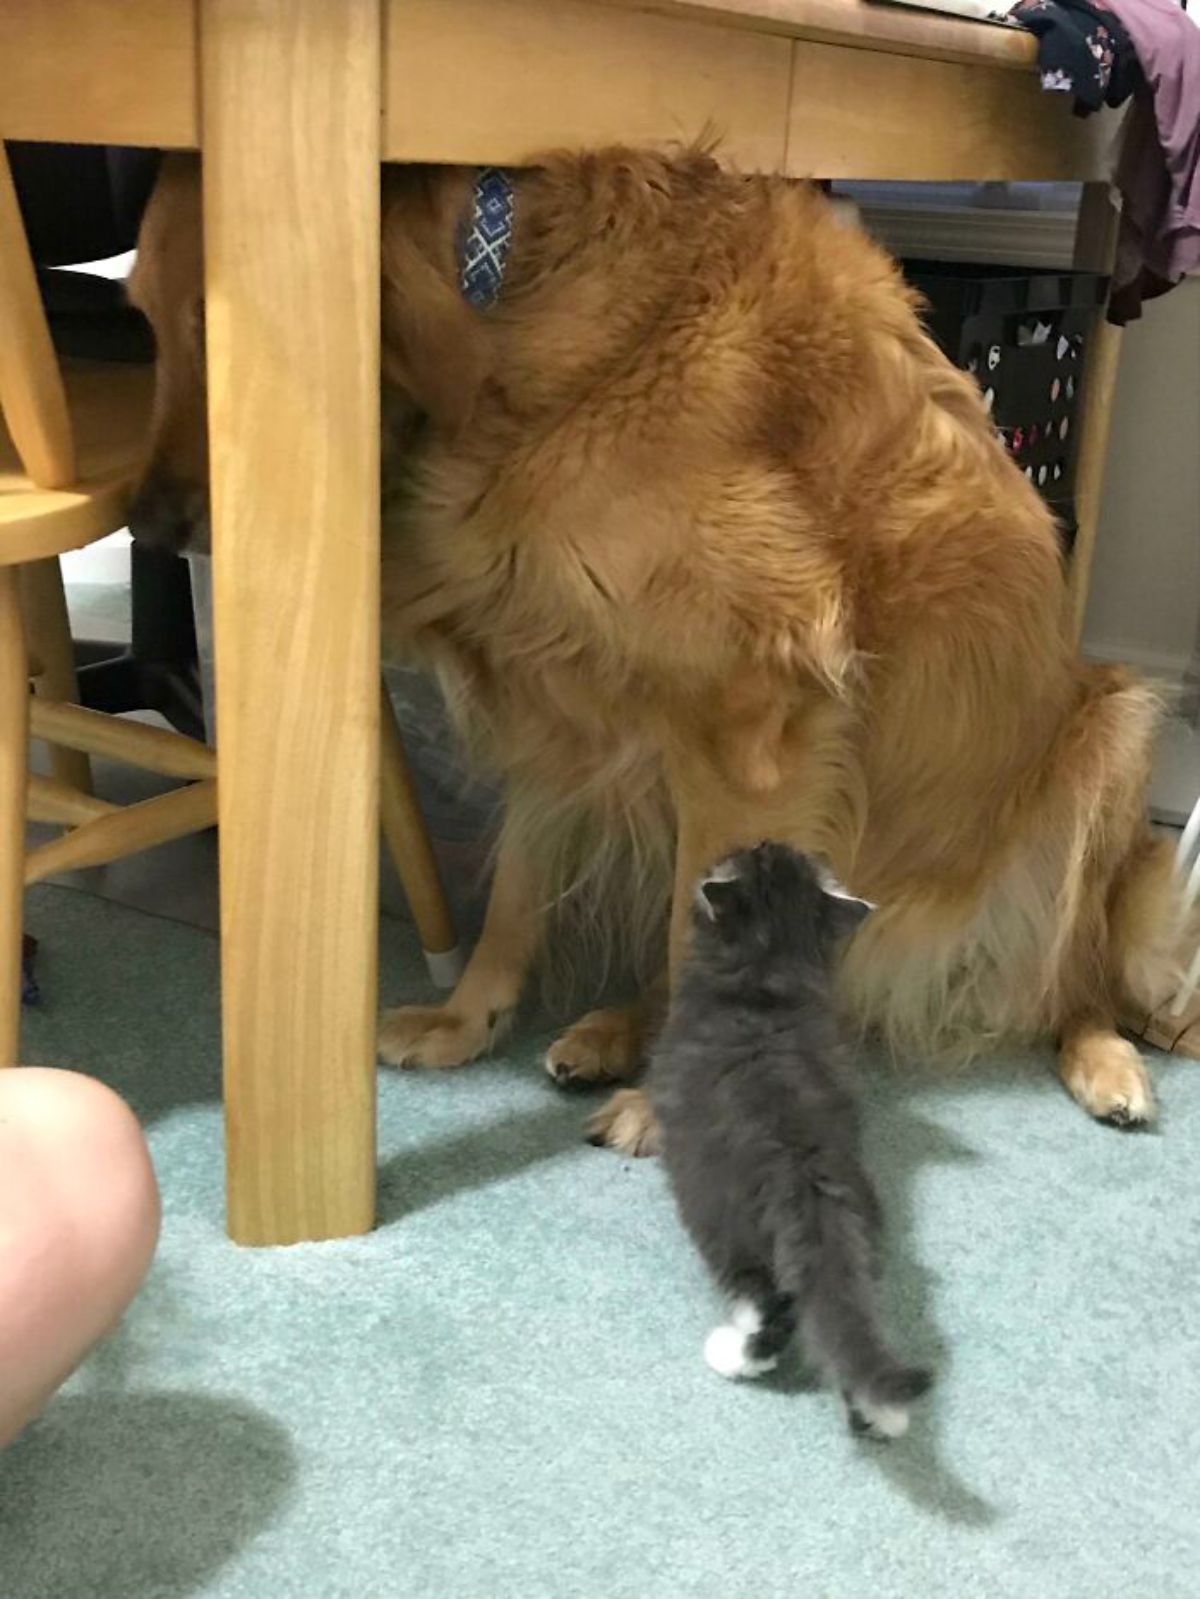 large golden retriever hiding under a table from a small grey kitten